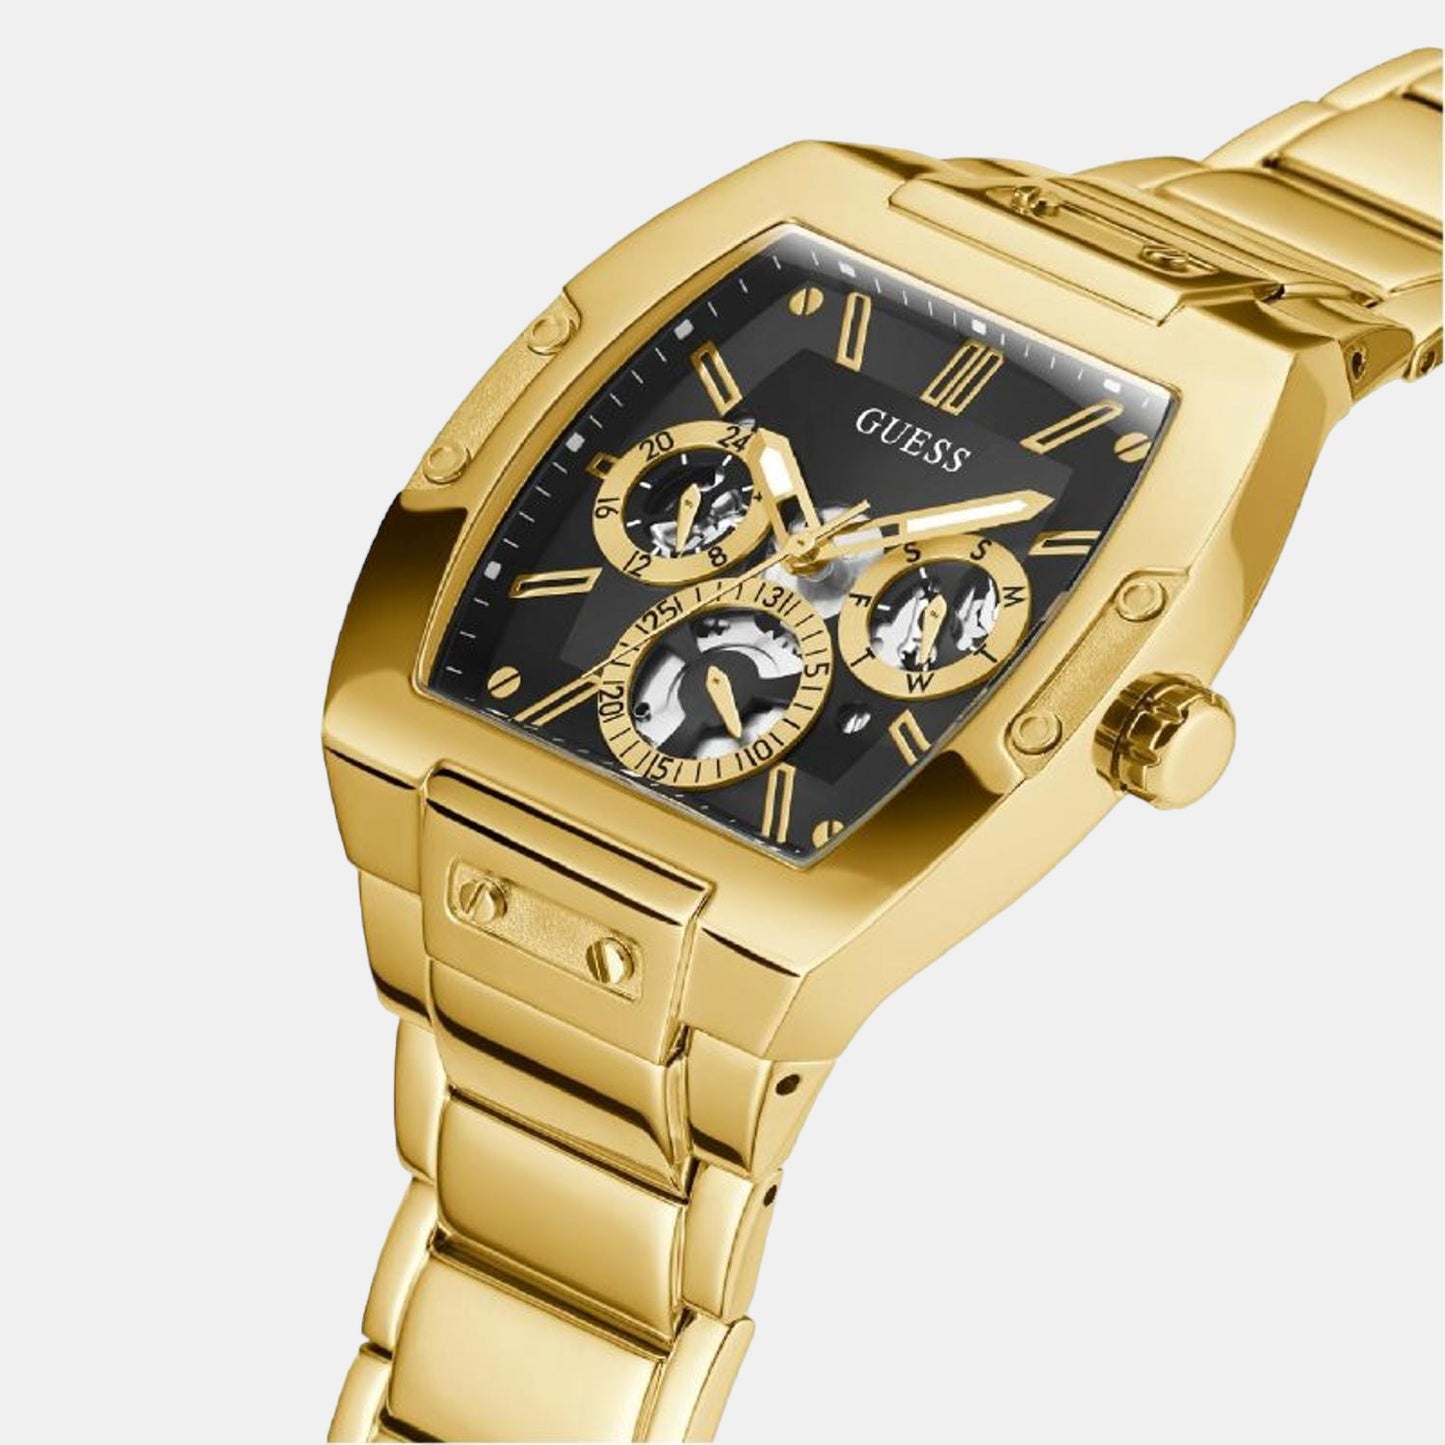 guess-stainless-steel-gold-analog-male-watch-gw0456g1